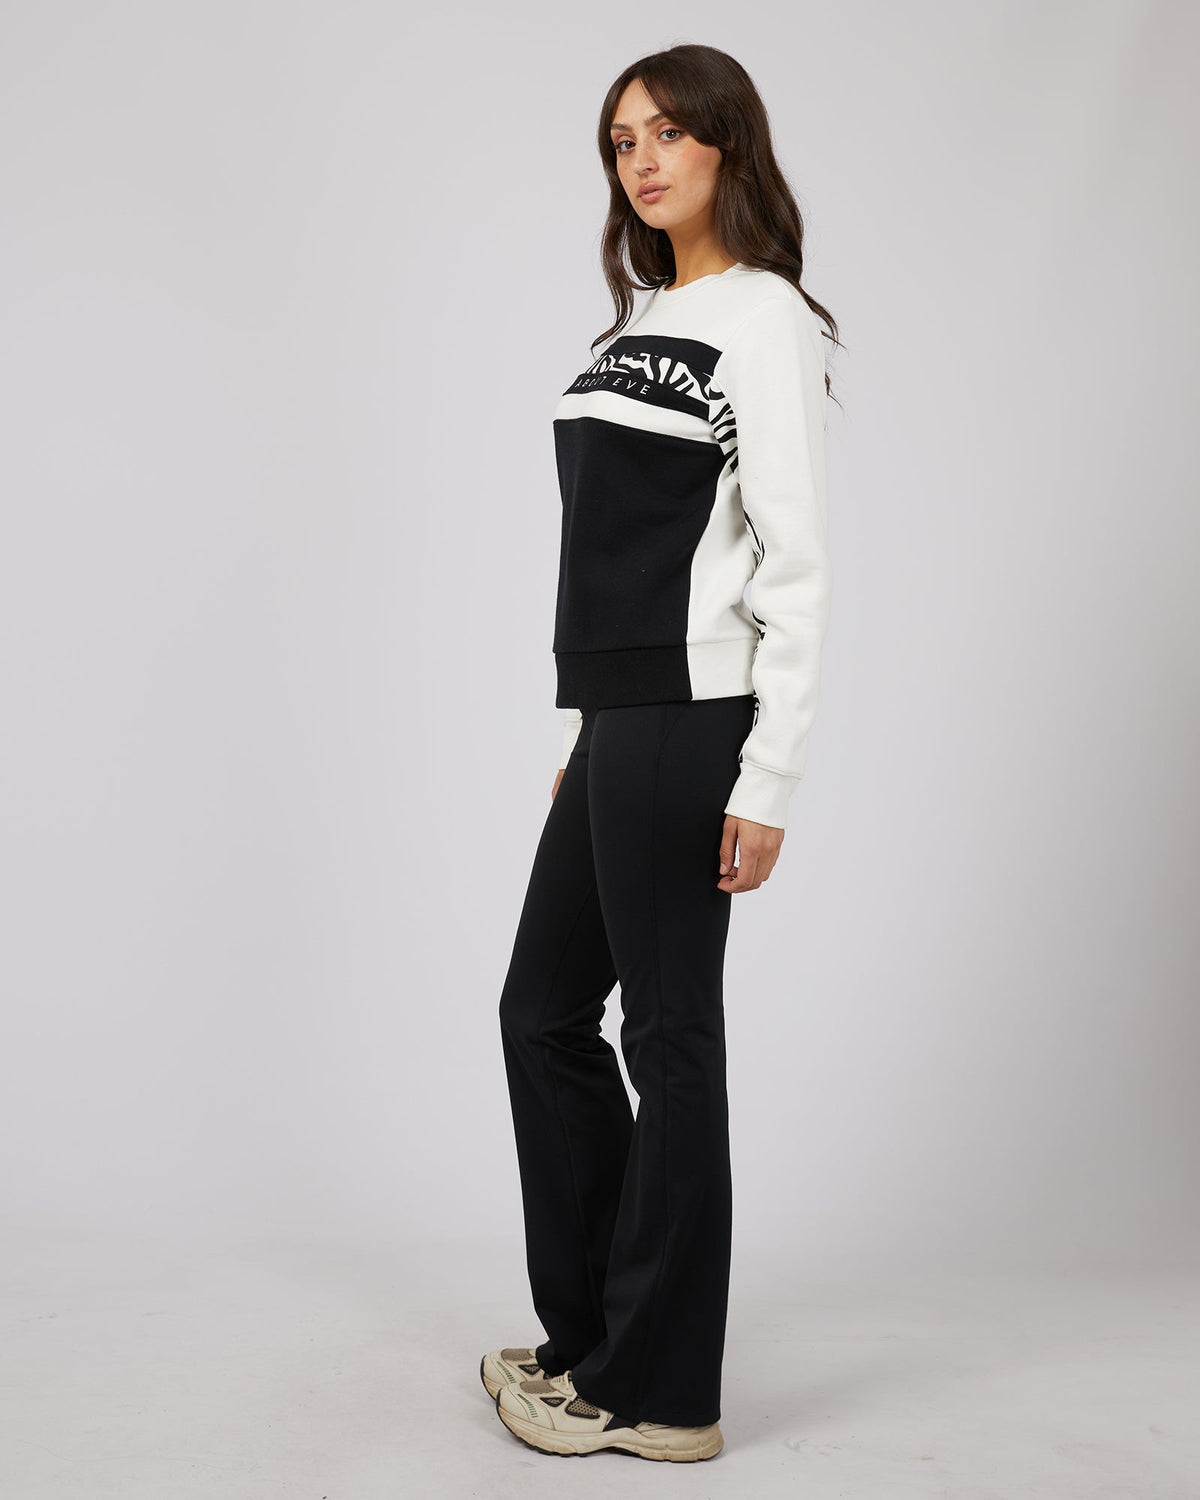 All About Eve-Parker Contrast Crew Black-Edge Clothing